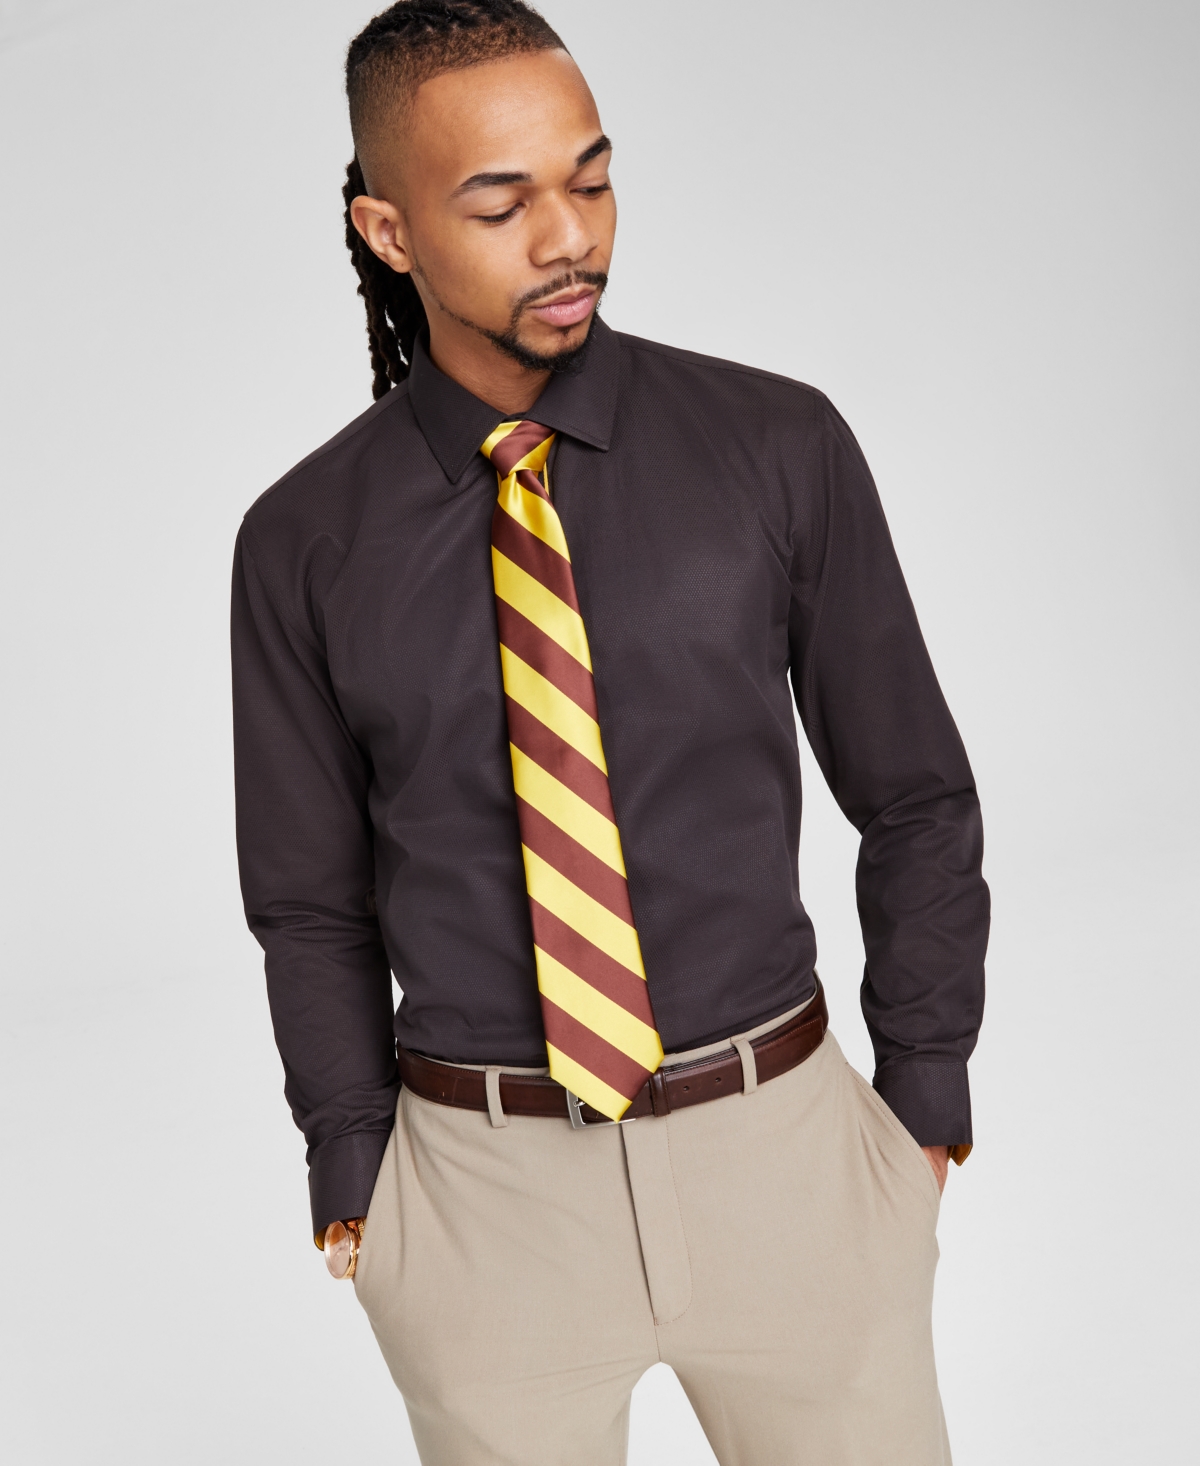 Tayion Collection Men's Slim-fit Gold Trim Solid Dress Shirt In Black And Gold